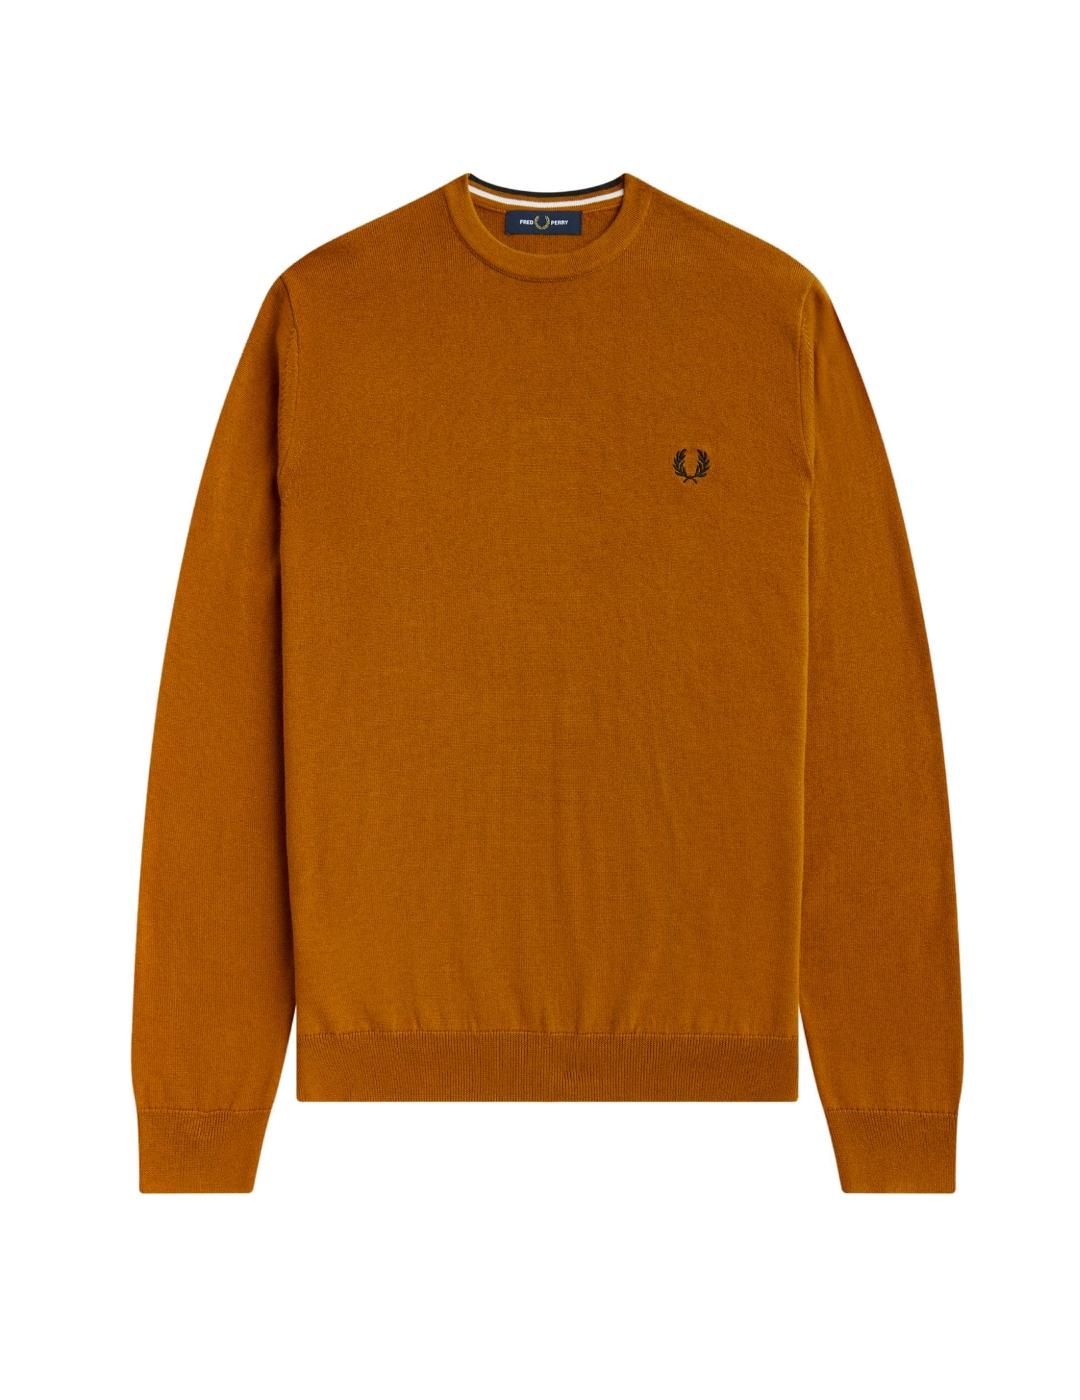 Jersey Fred Perry camel para hombre-z